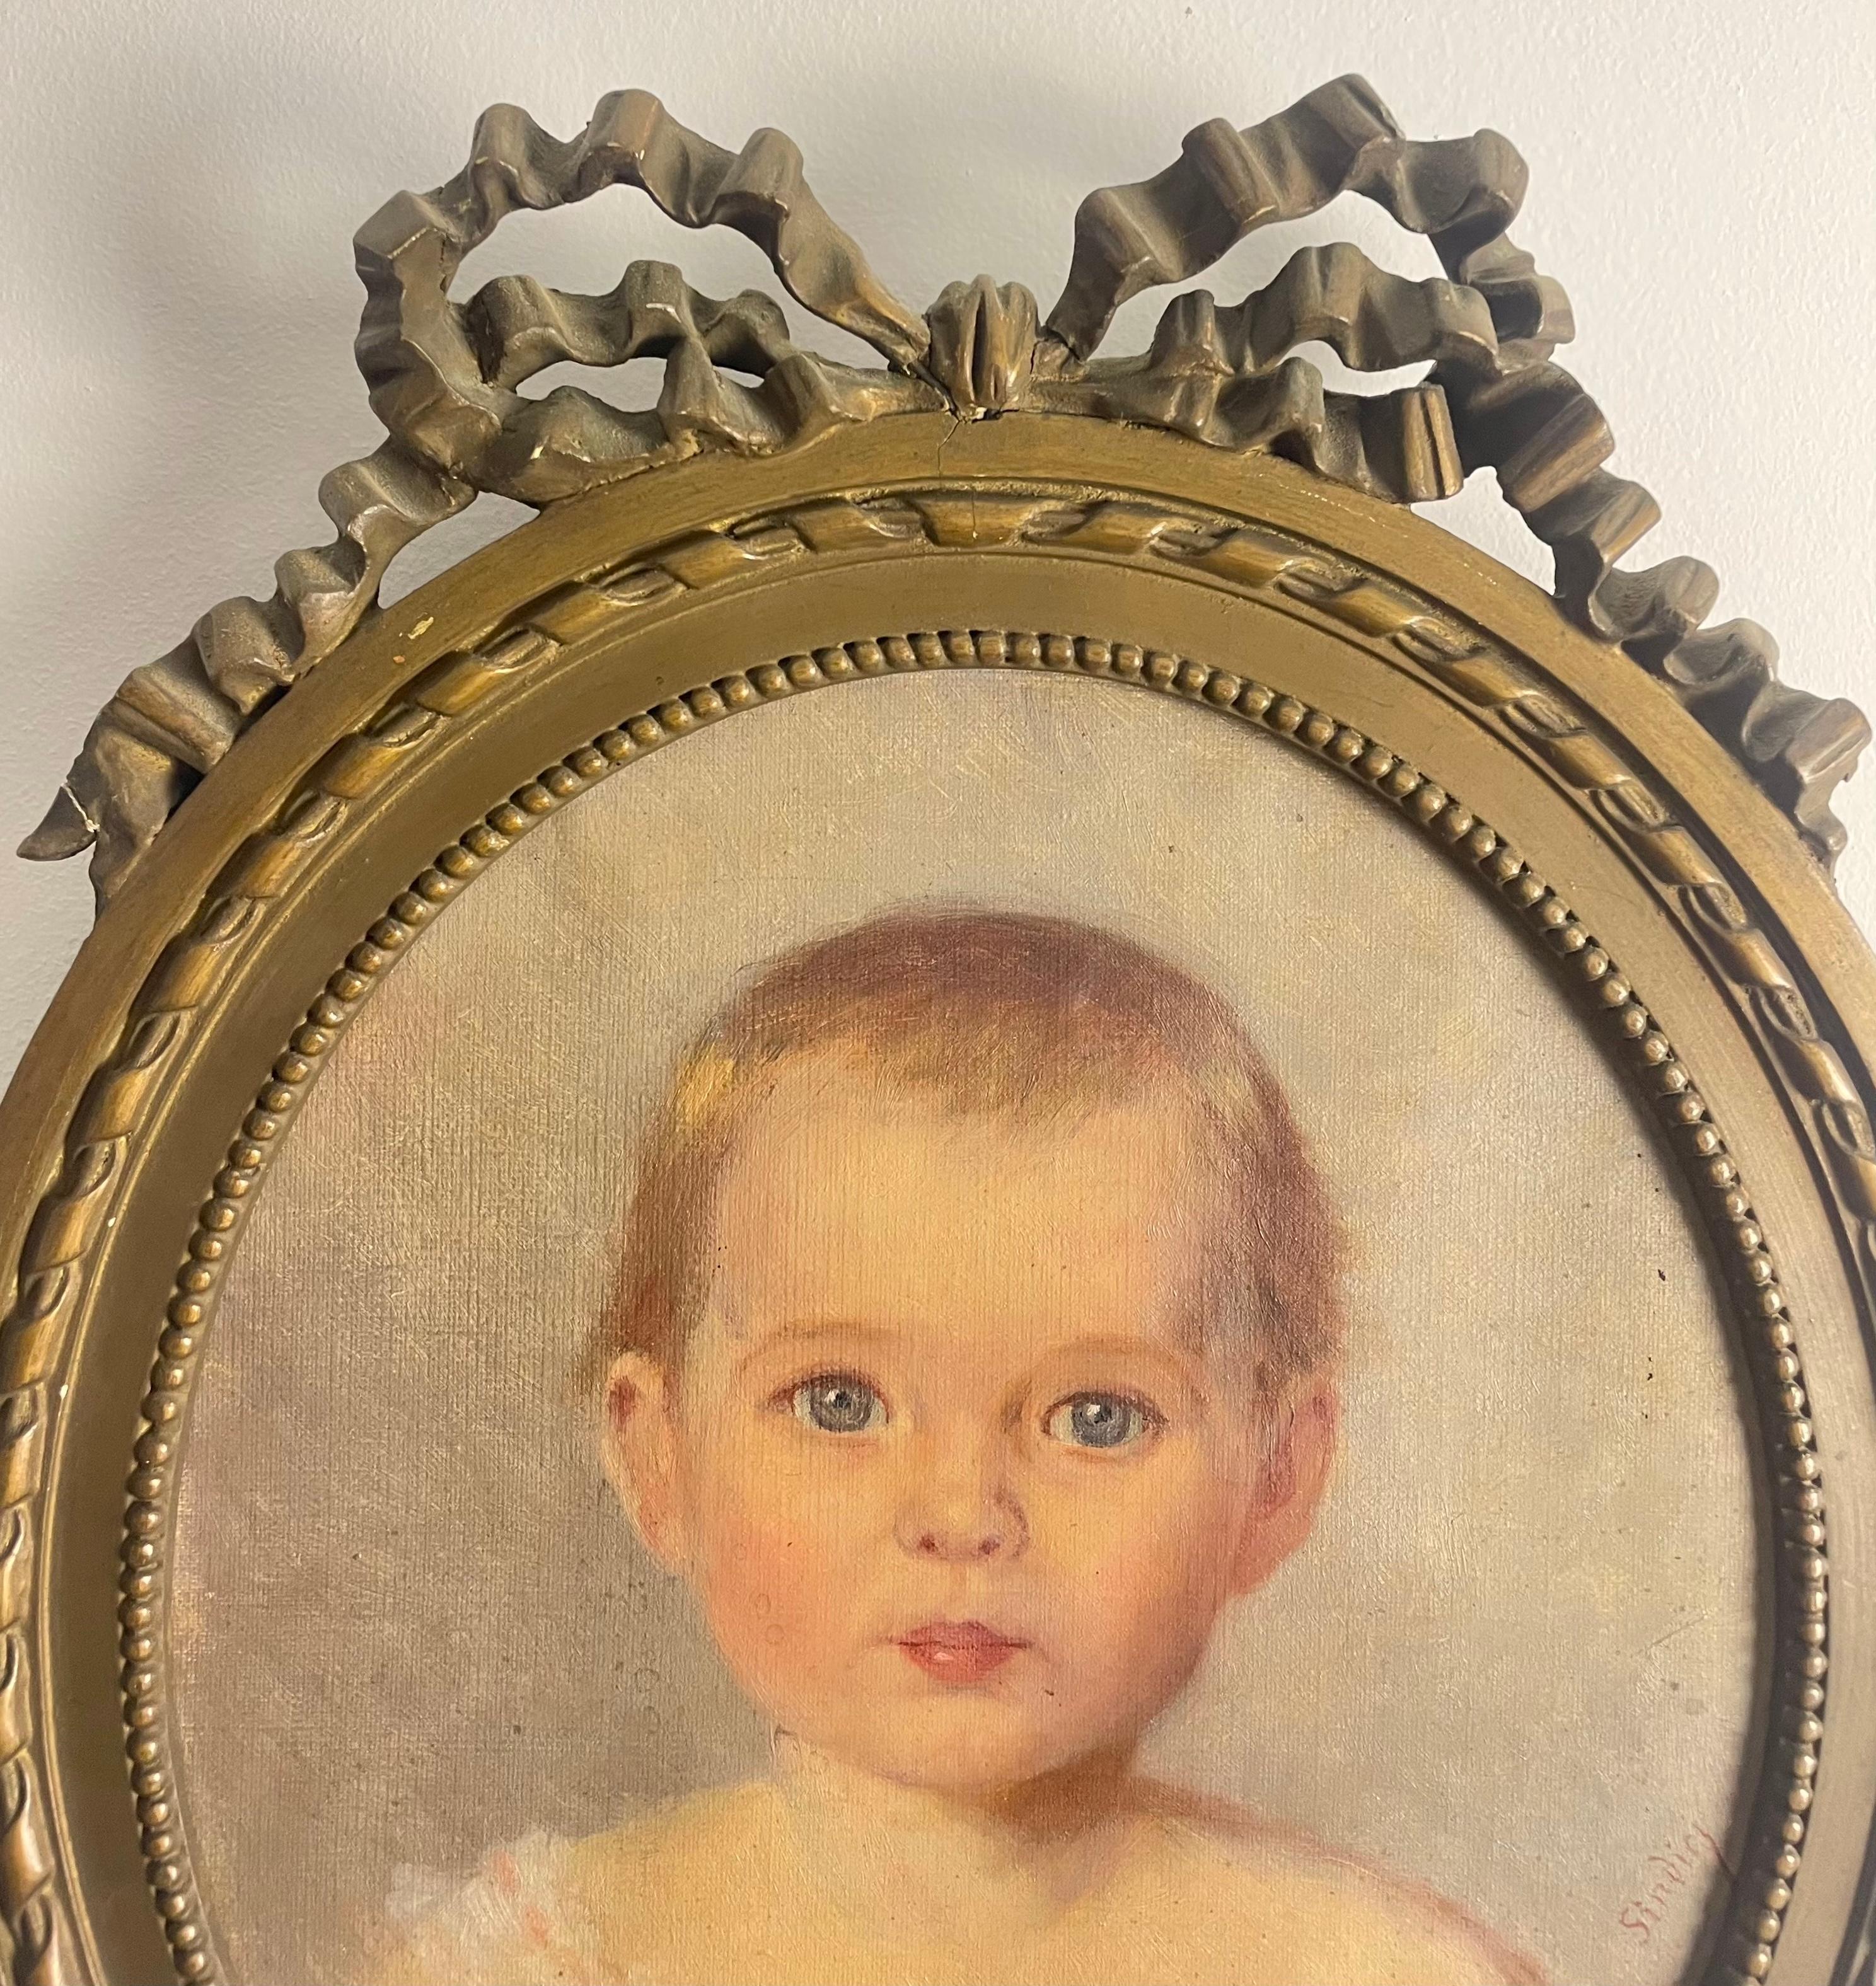 Painted Portrait of baby / young child -Painting - Oil on canva - Framed - 19th France.  For Sale